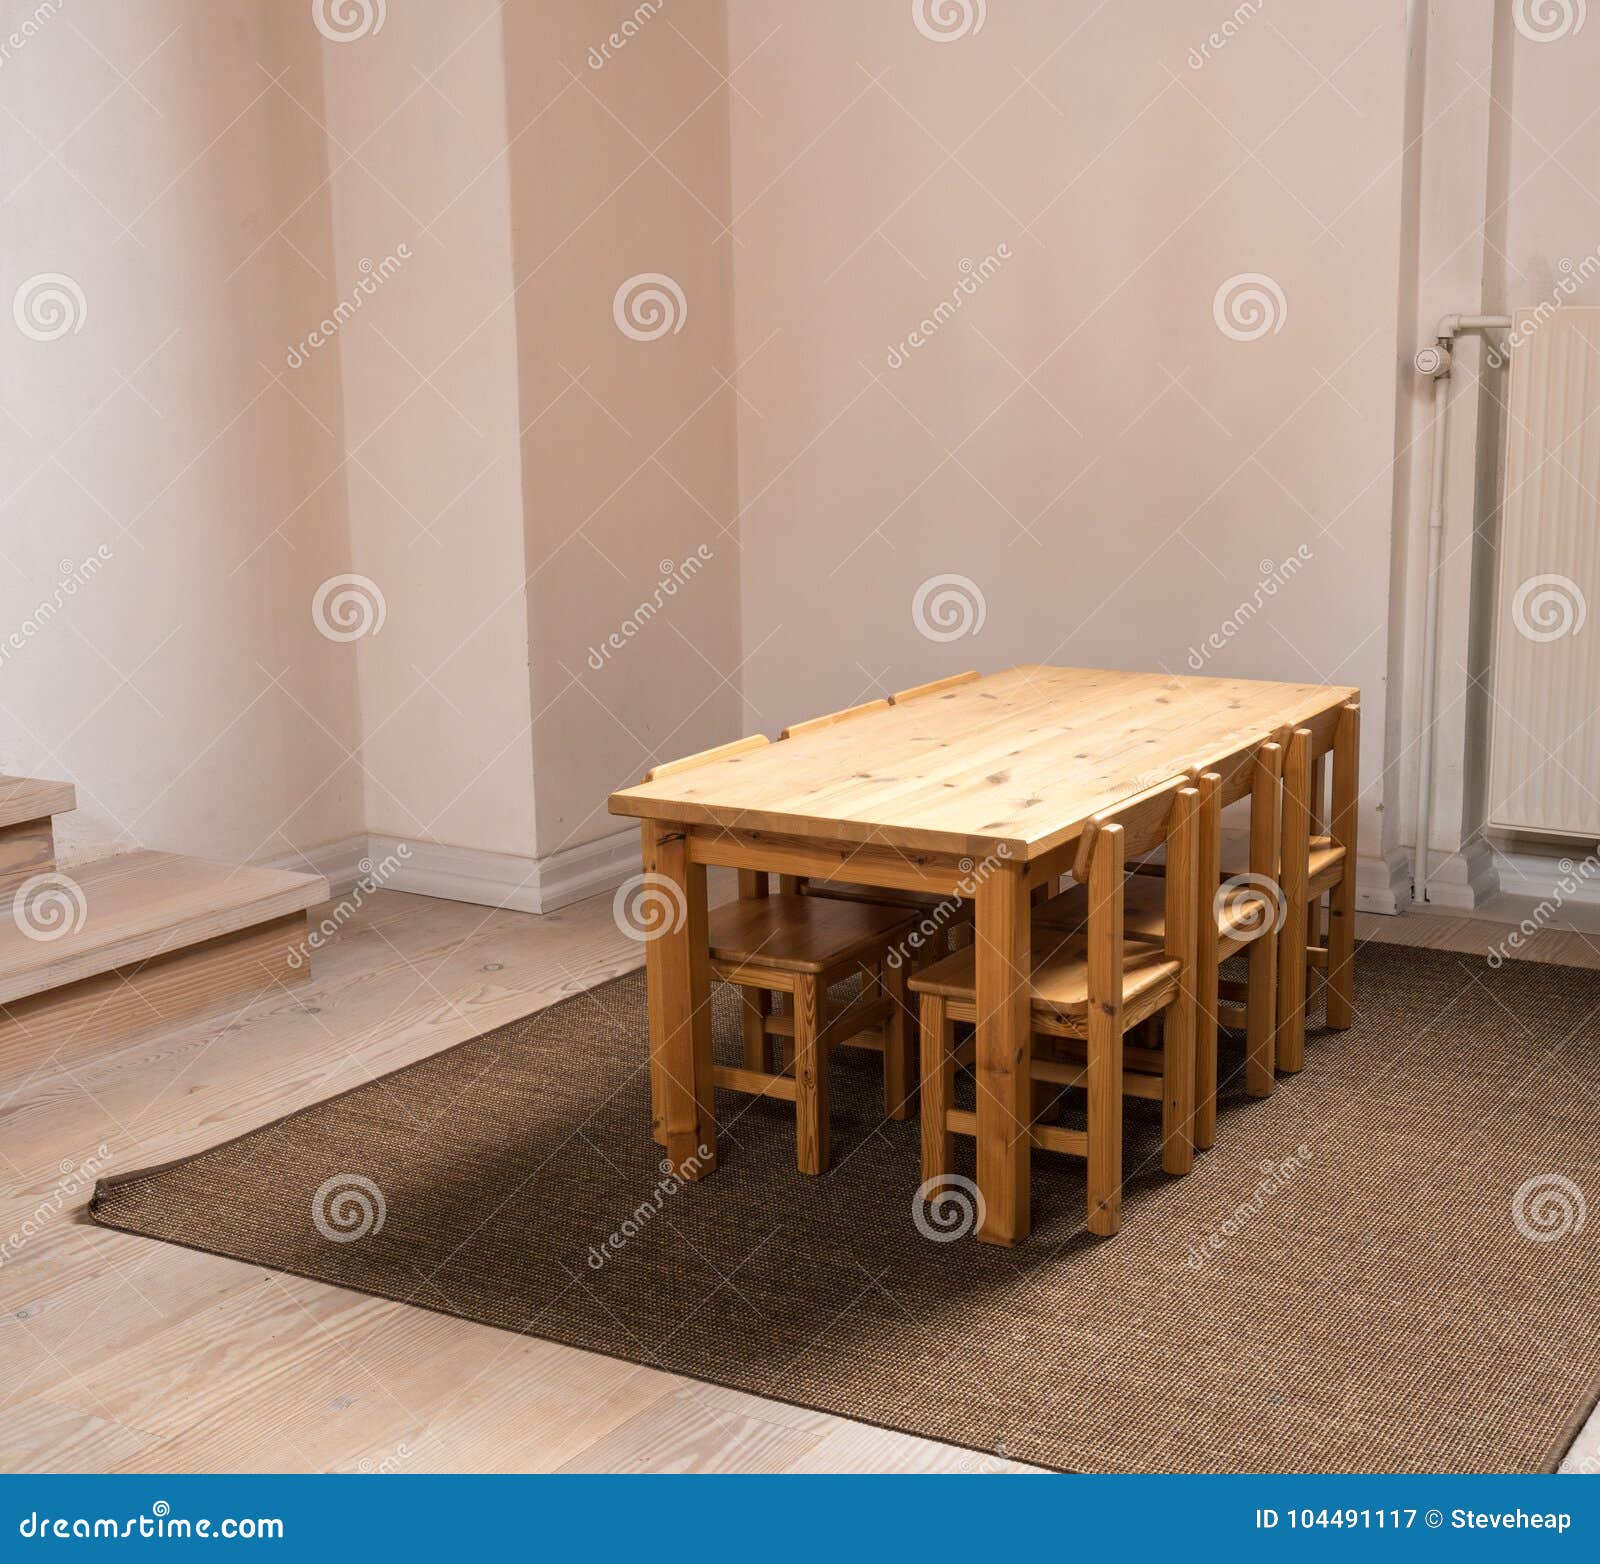 Child Sized Table And Six Chairs In Classroom Stock Image Image